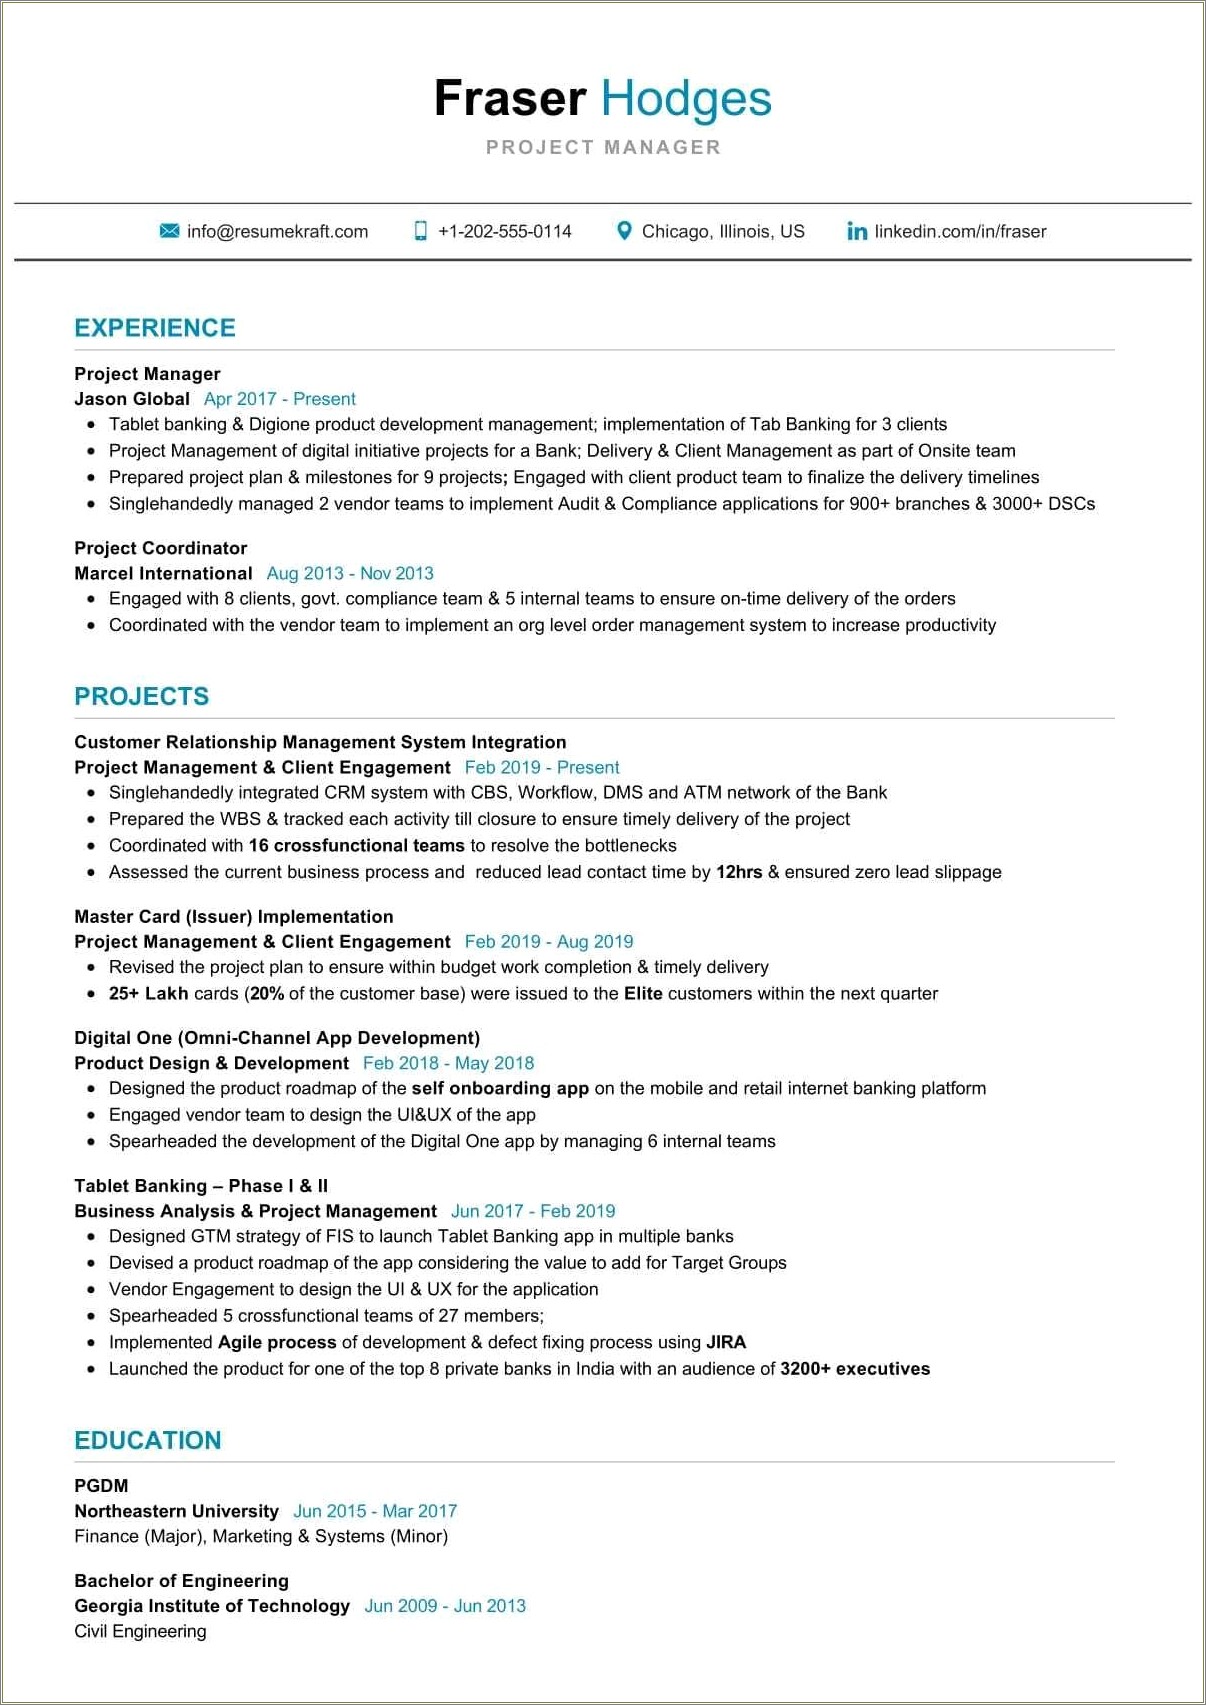 Functional Resume Sample For Project Manager